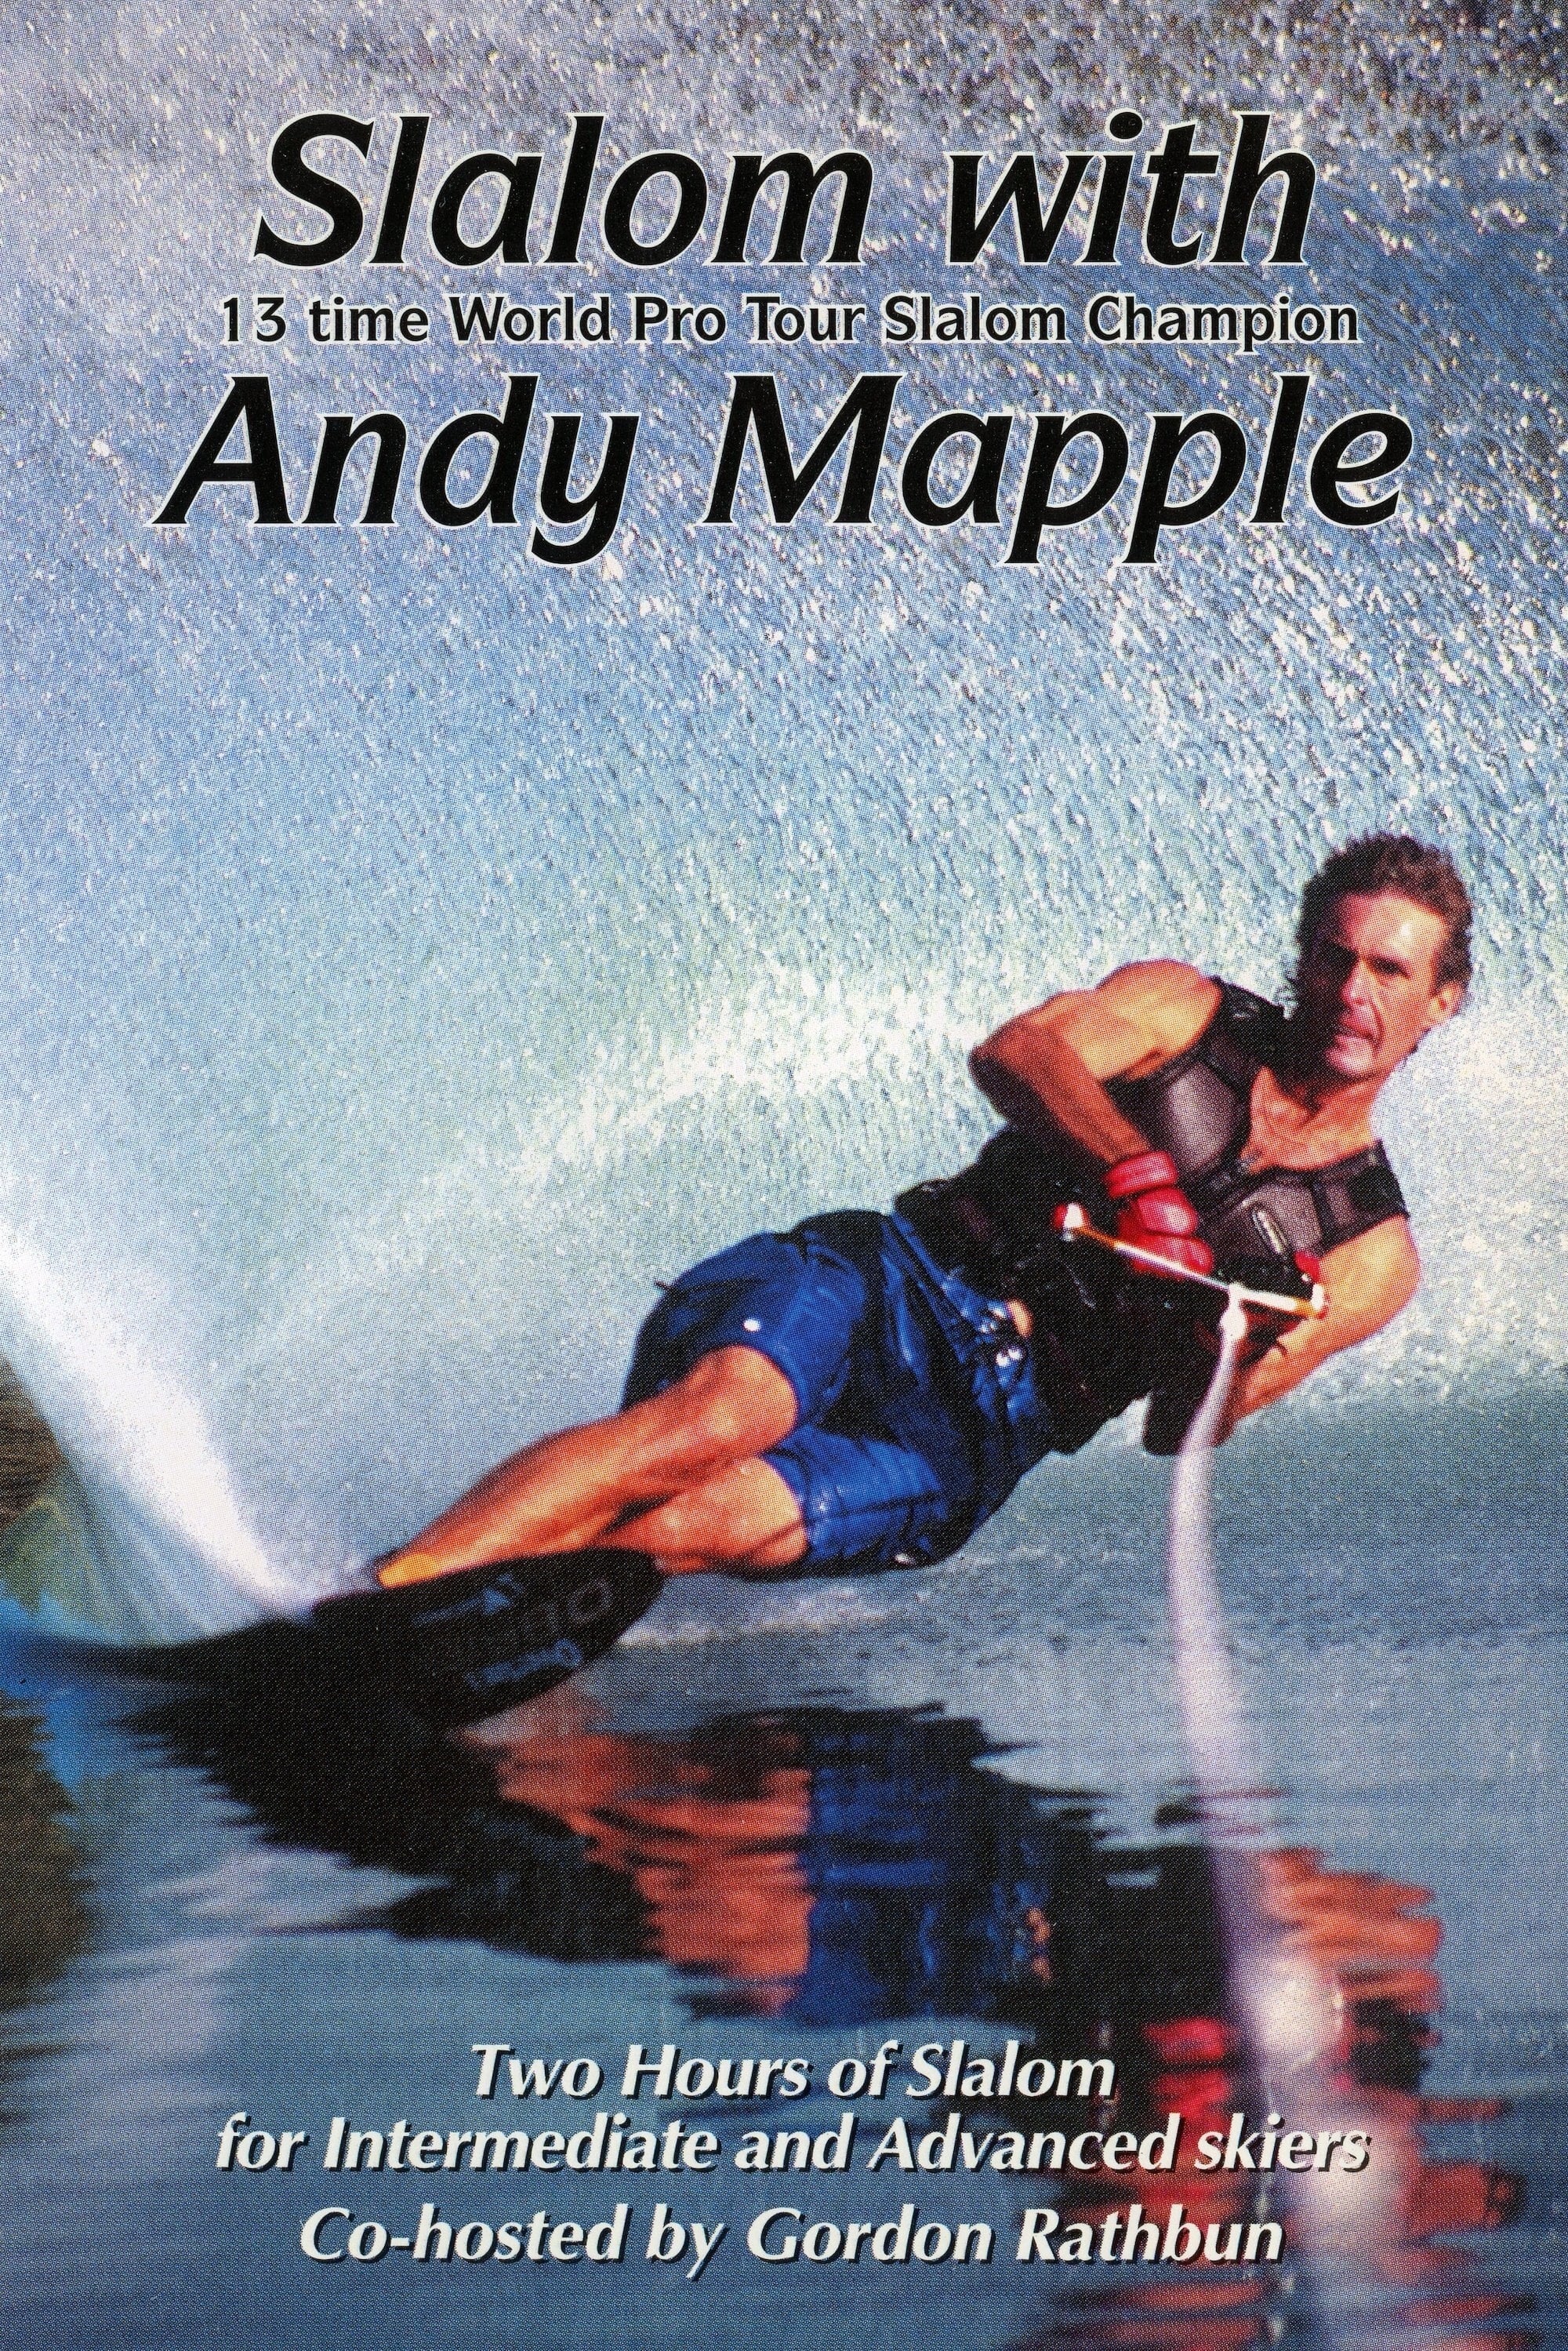 Slalom with Andy Mapple